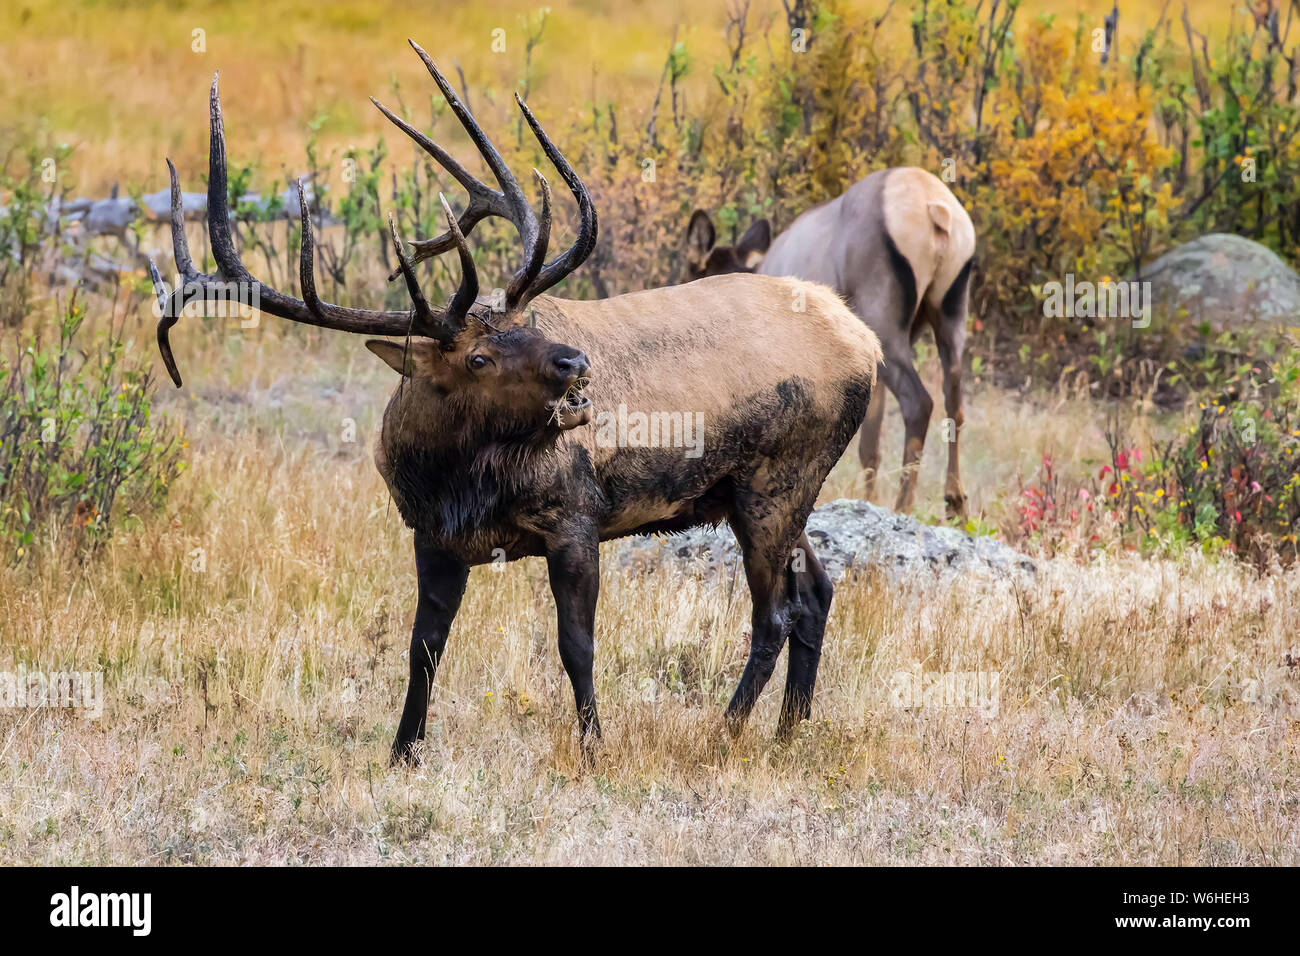 Bull elk (Cervus canadensis) bugling with cow elk in the background; Denver, Colorado, United States of America Stock Photo